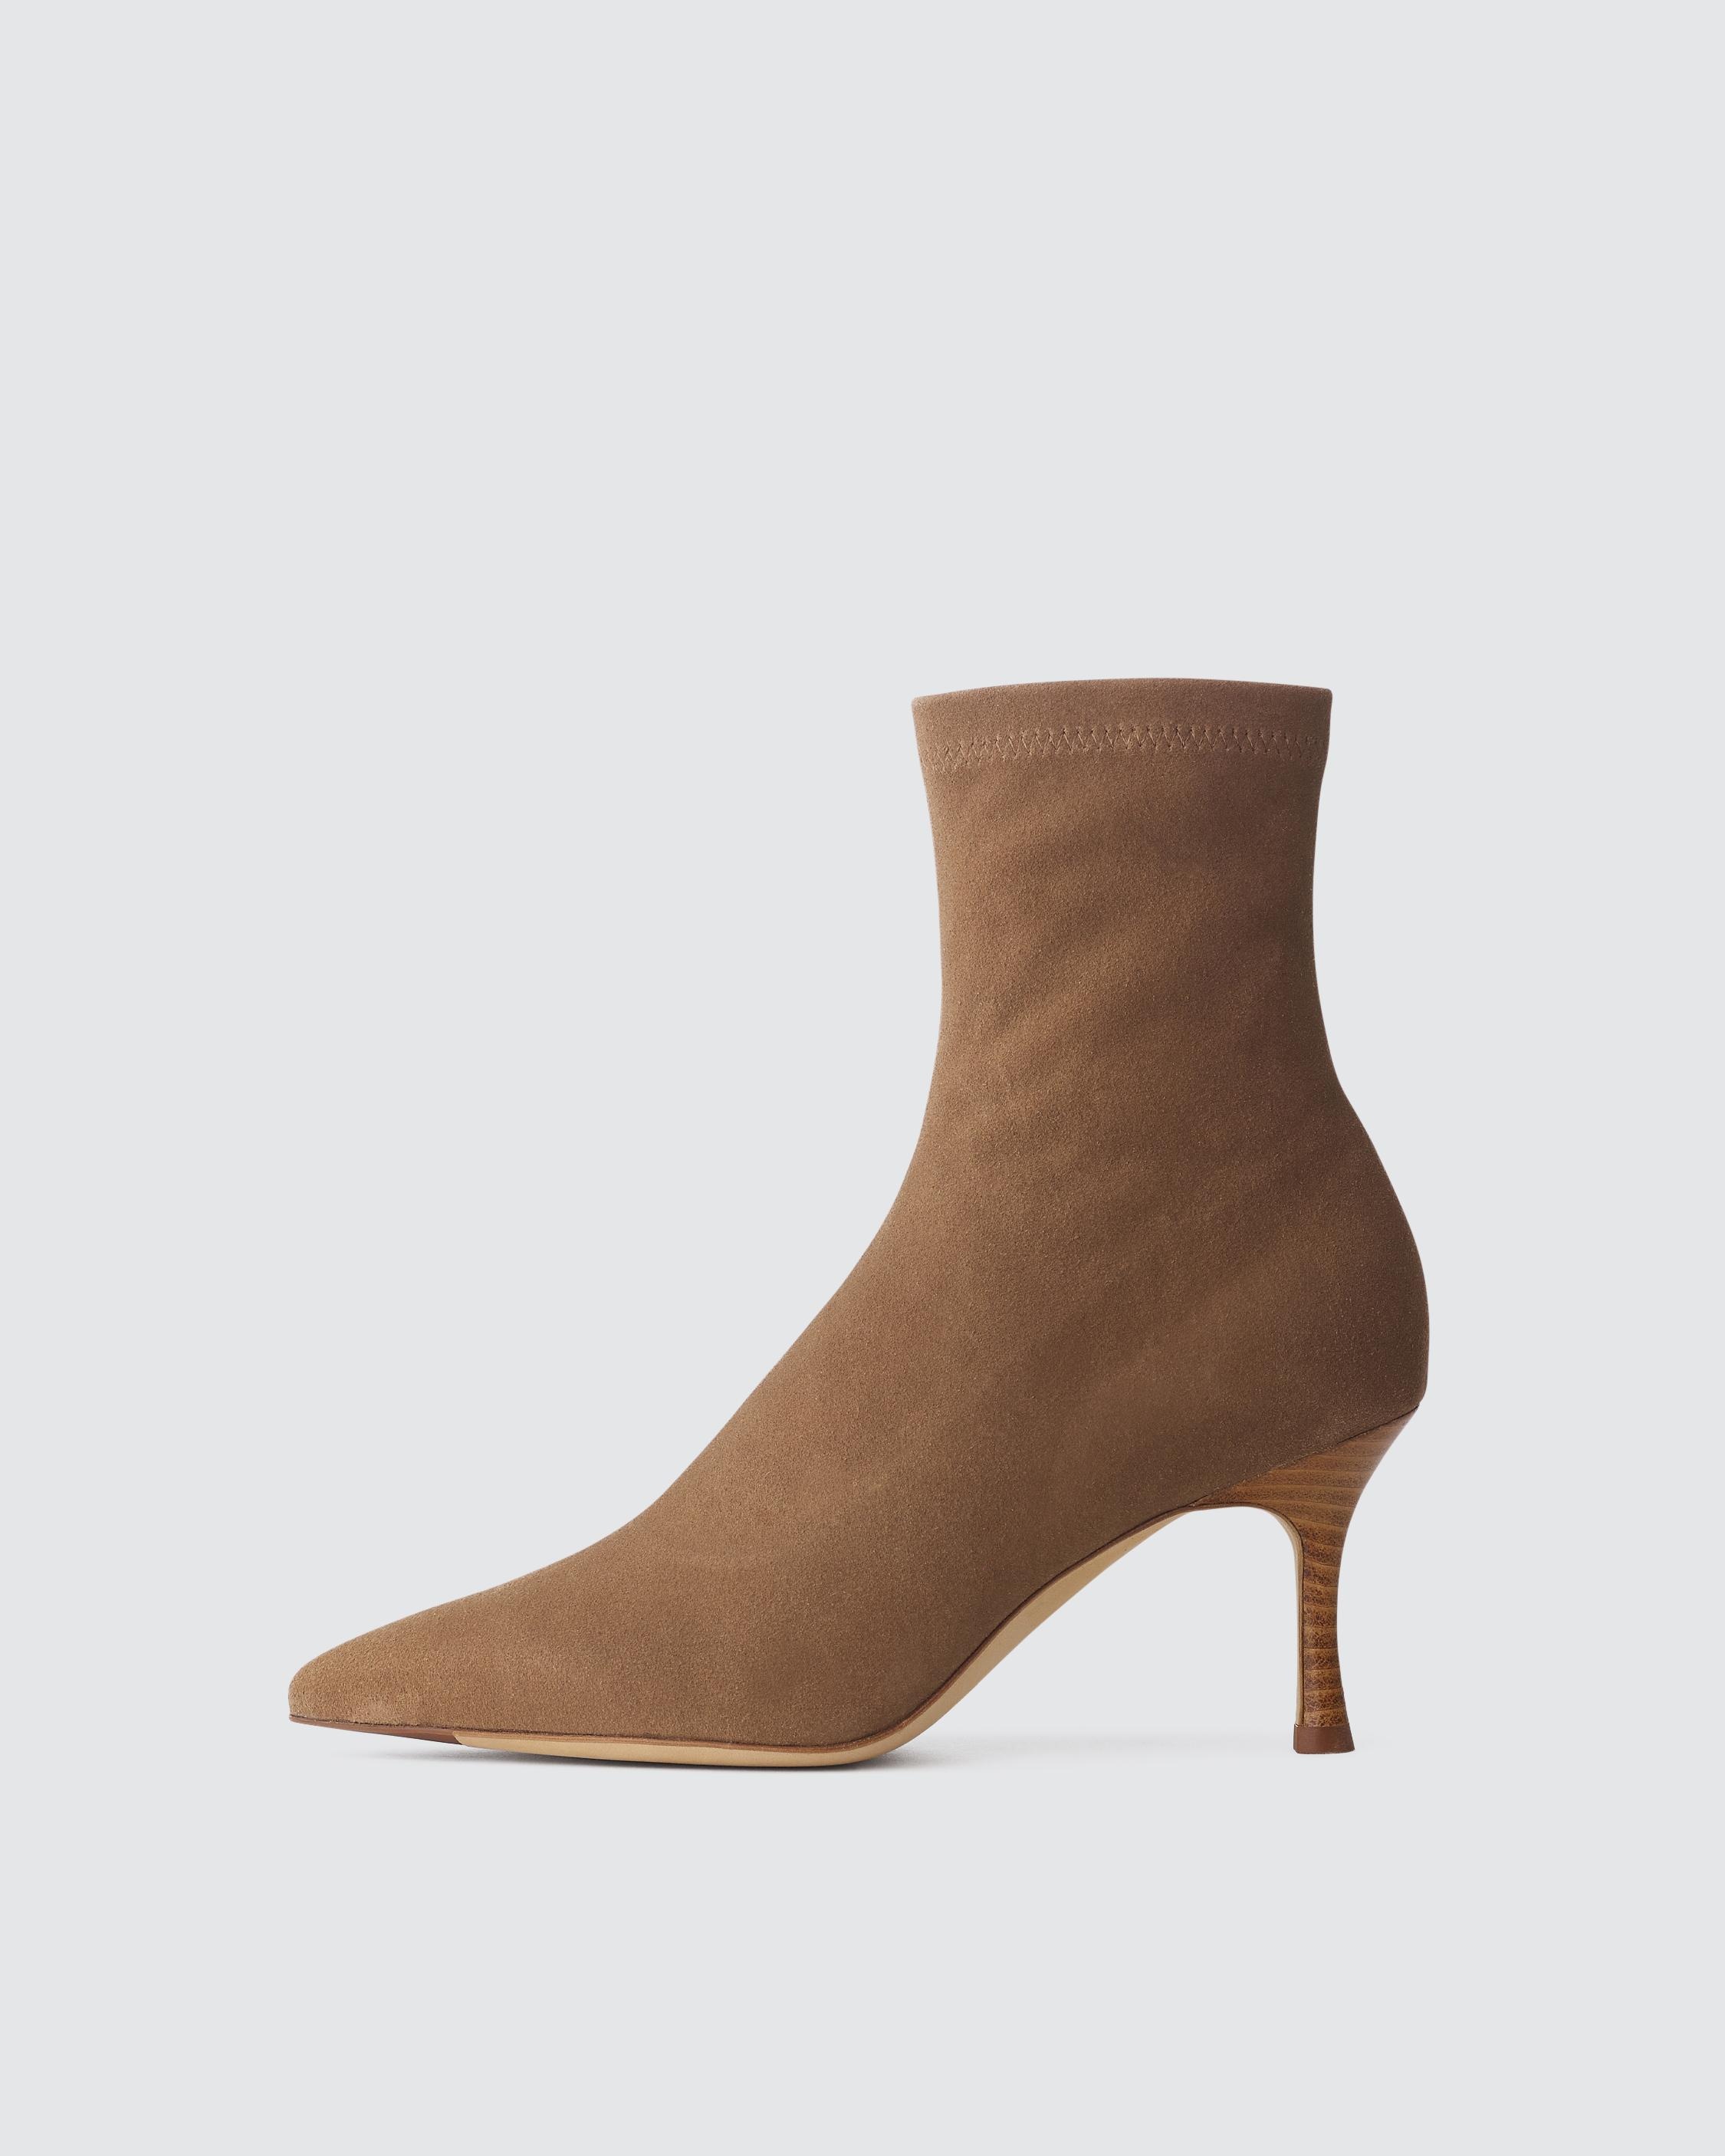 Brea Boot - Suede
Heeled Ankle Boot - 1